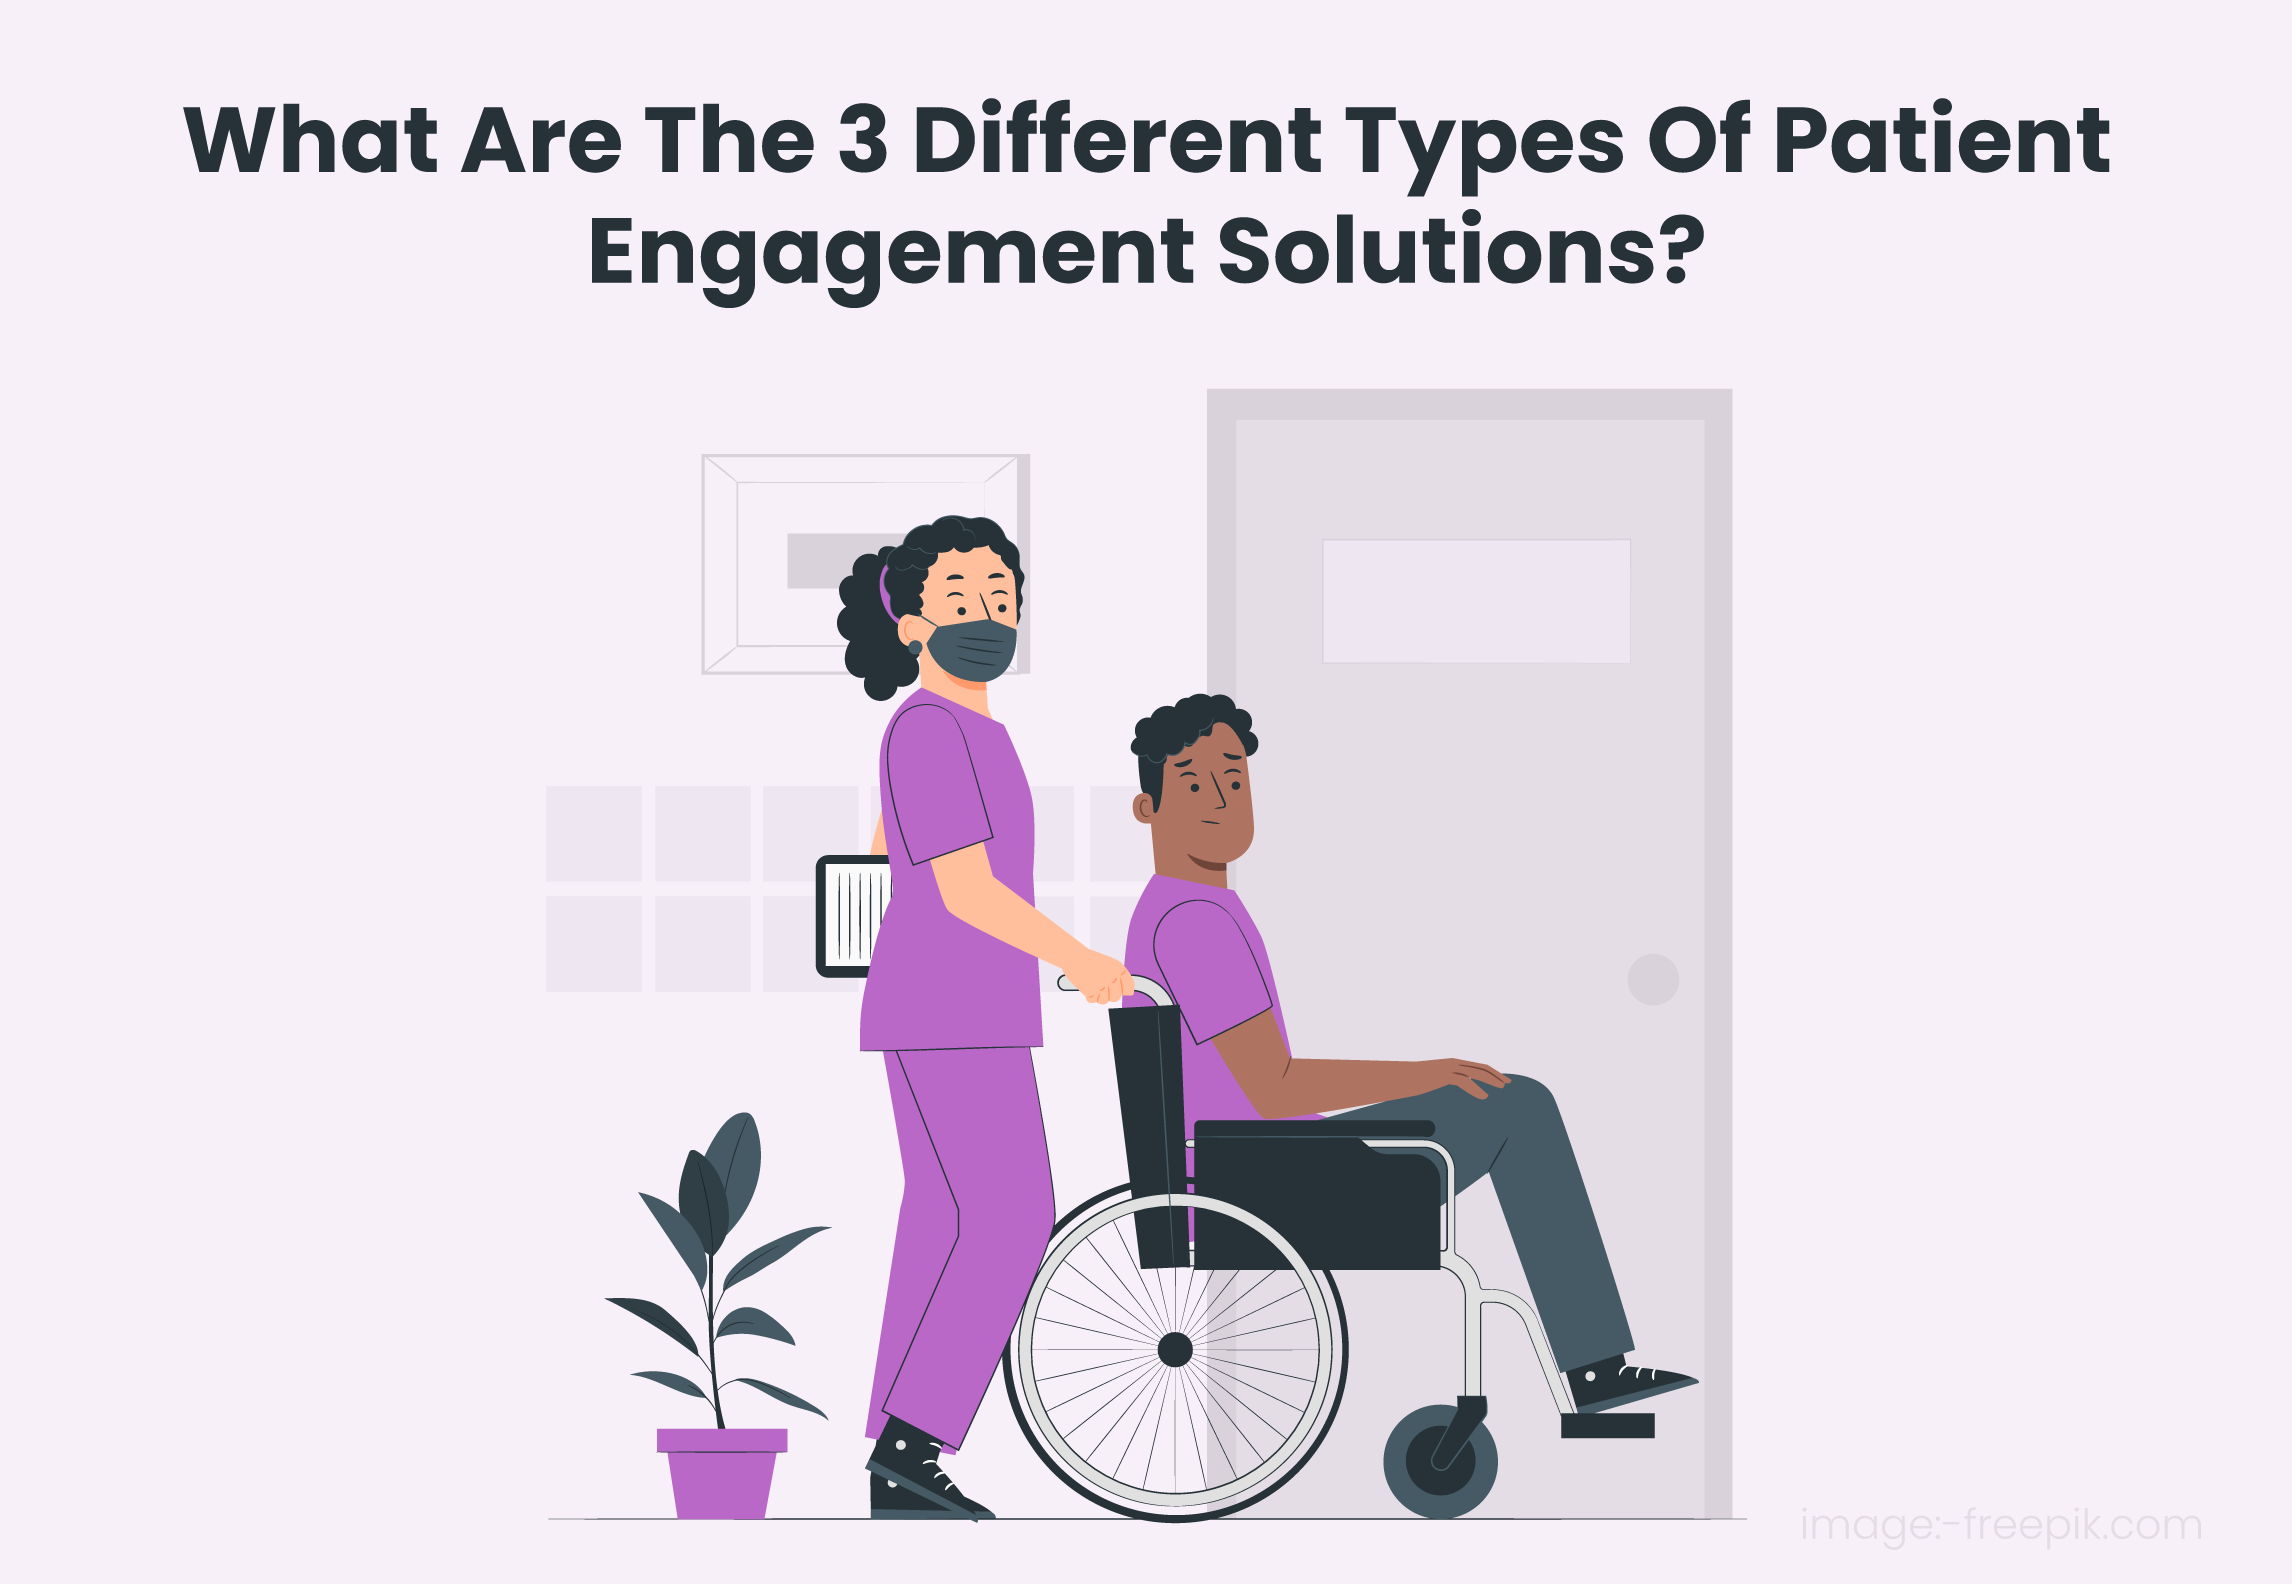 What Are The 3 Different Types Of Patient Engagement Solutions